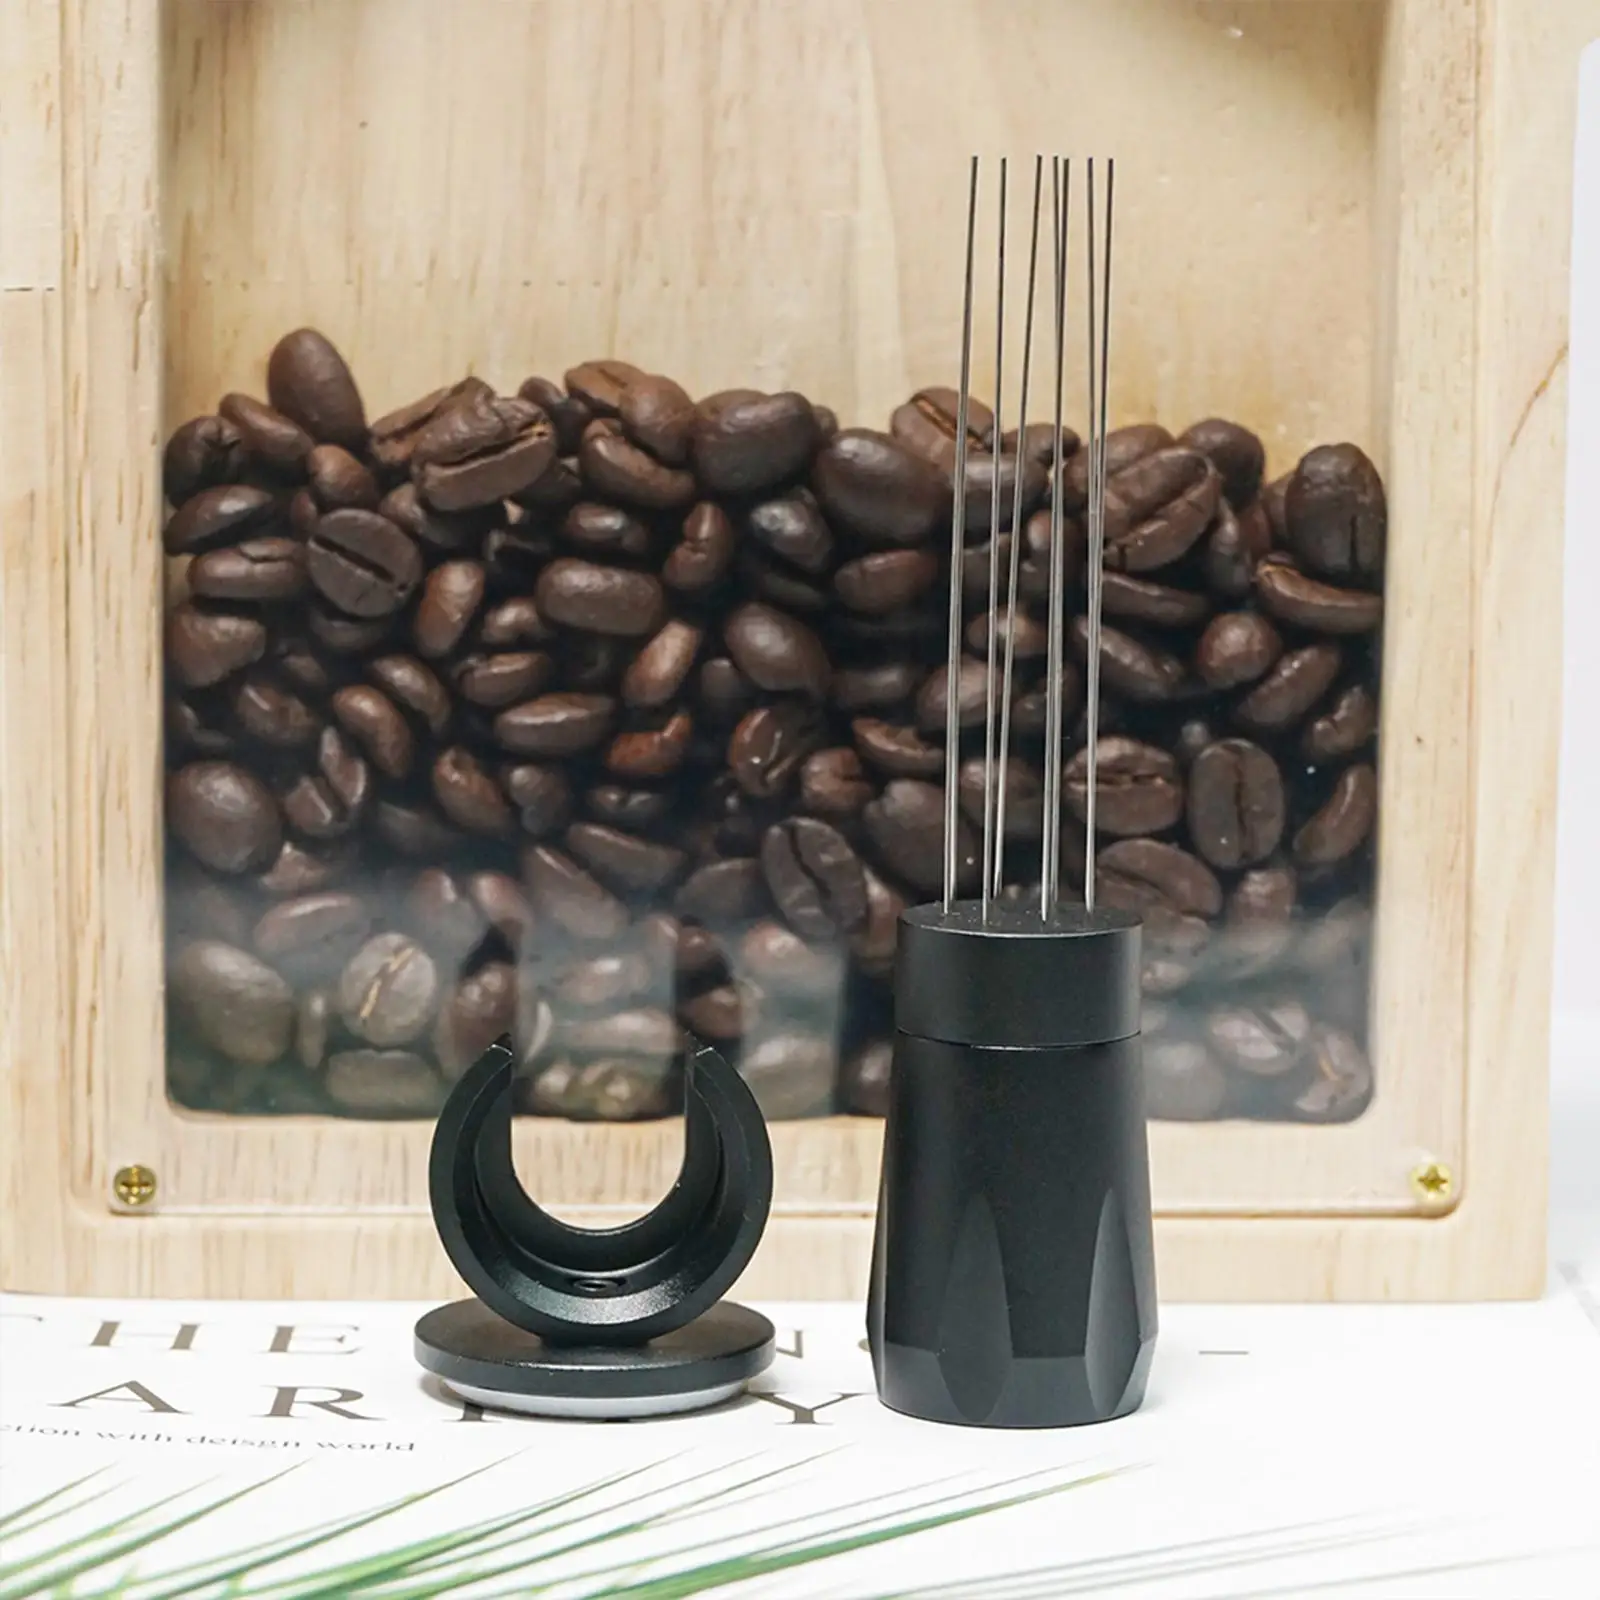 Coffee Tamper Distributor Stainless Steel Coffee Distribution Professional Espresso Tools for Office Coffee Shop Travel Home